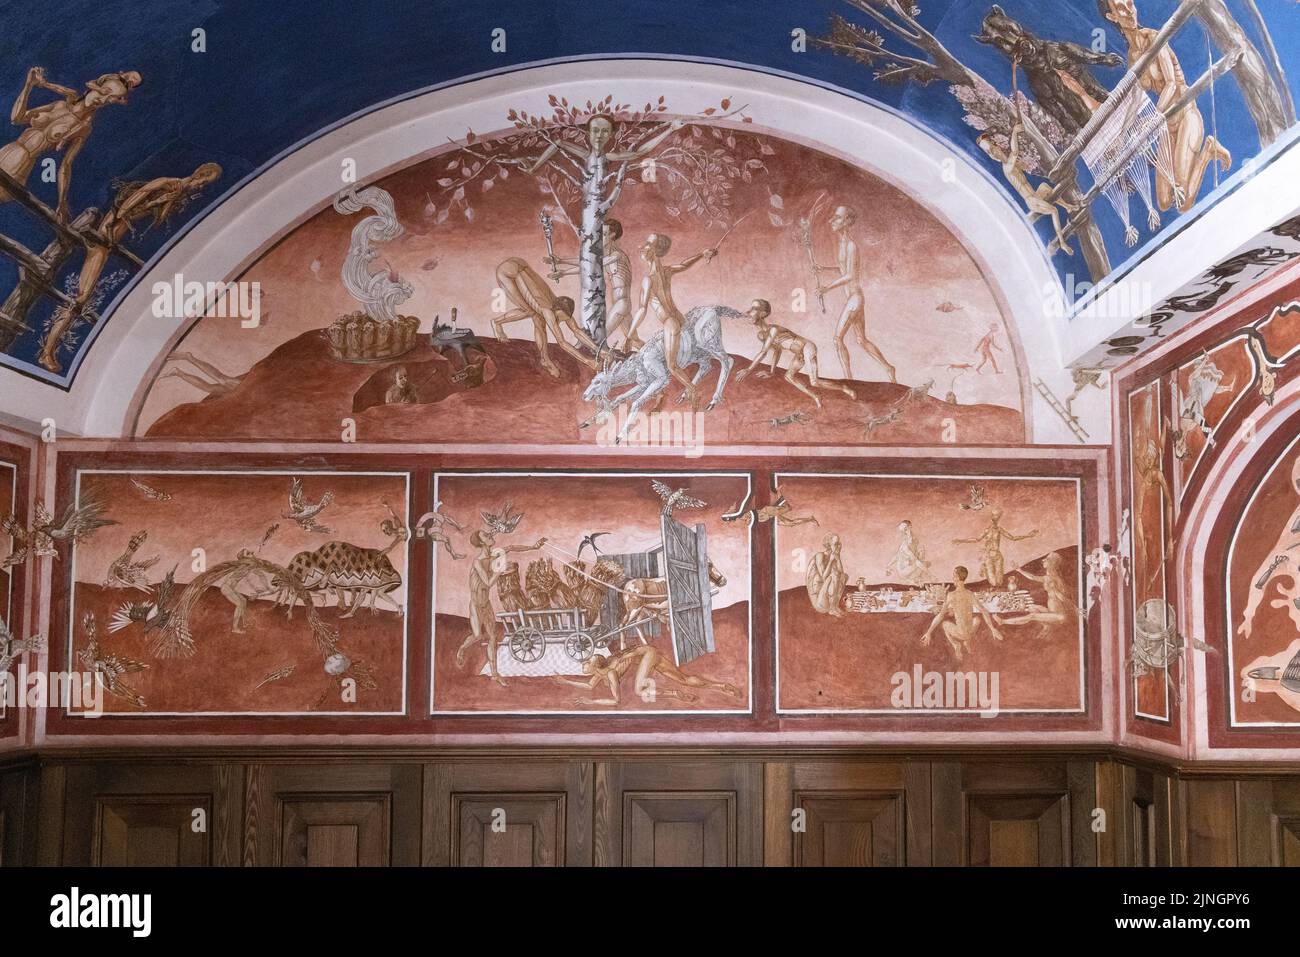 Wall painting, 'The Seasons of the Year' by Petras Repsys - of Baltic mythology and Baltic history, Vilnius University, Vilnius Lithuania Europe Stock Photo